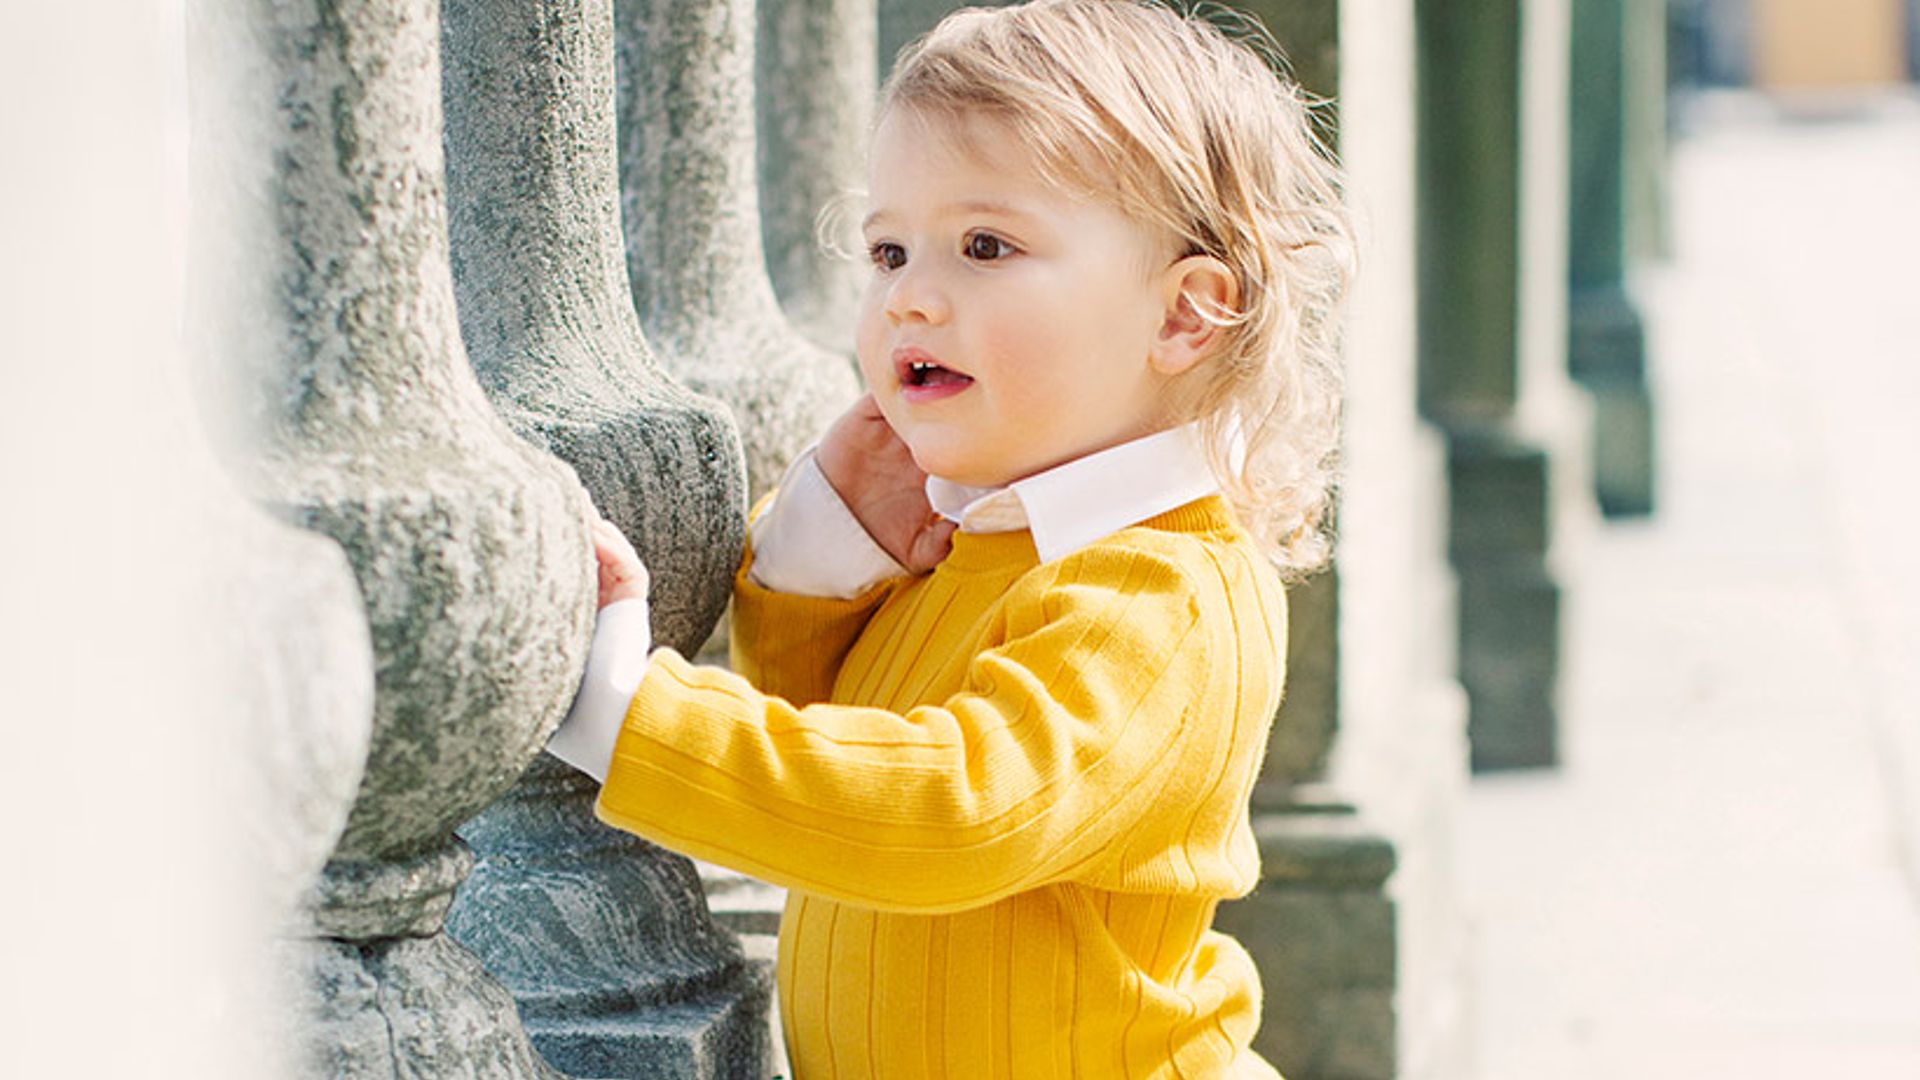 Prince Alexander marks second birthday with adorable photoshoot